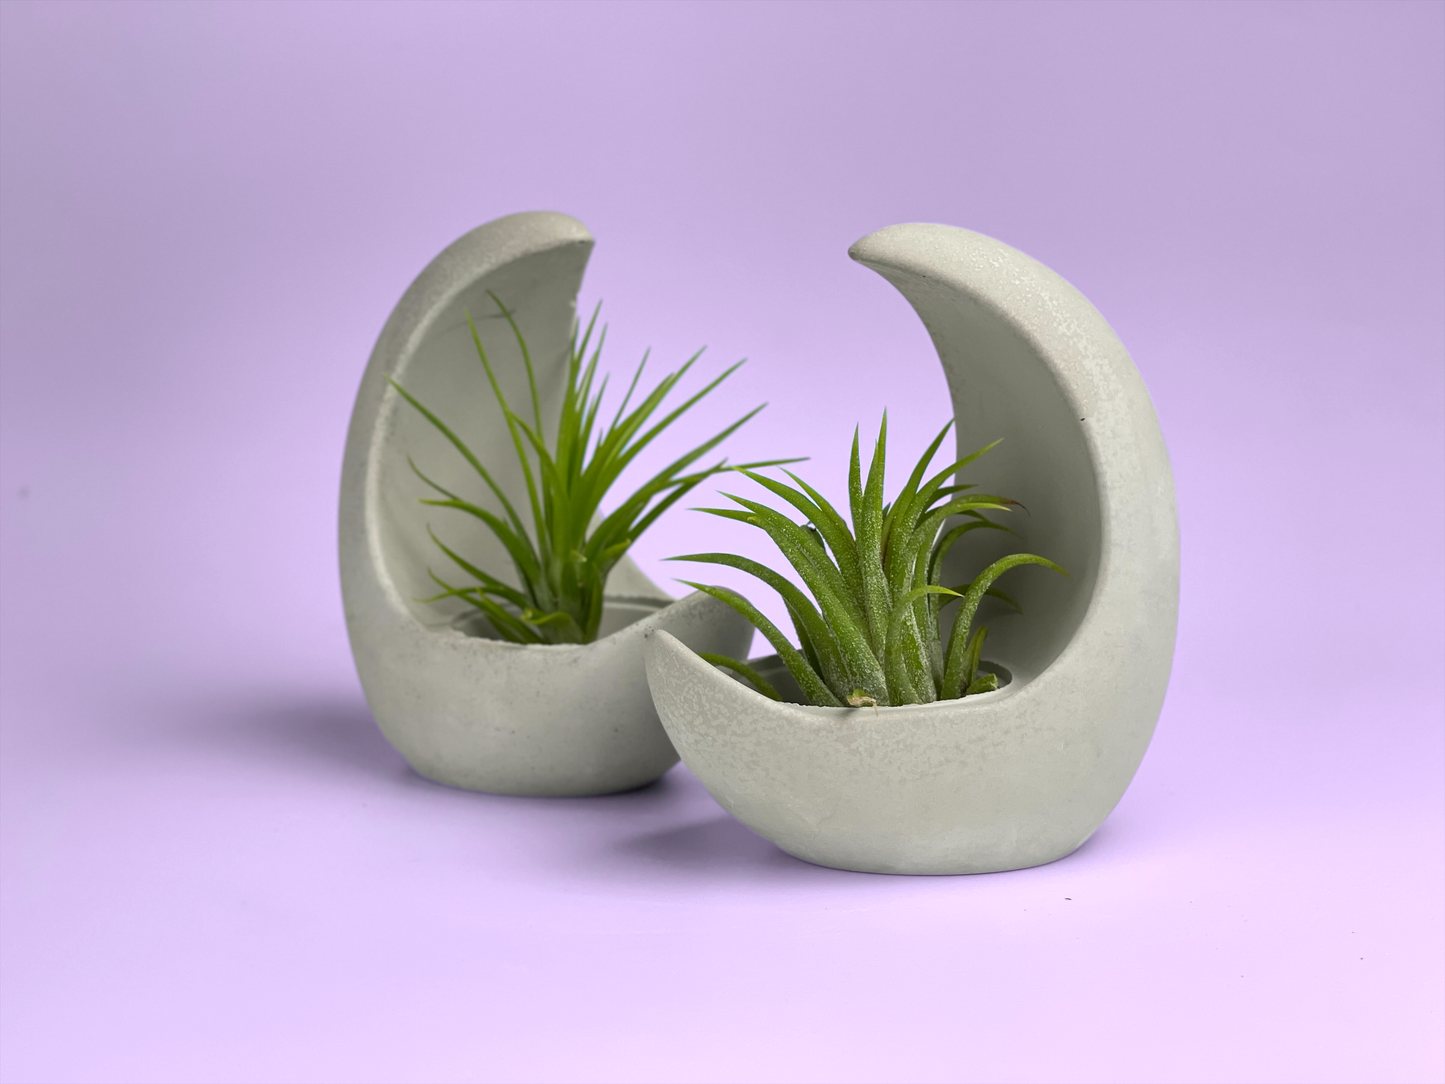 YOUNG MOON AIR PLANT HOLDER, Tillandsia Airplant Display: Moon Holder